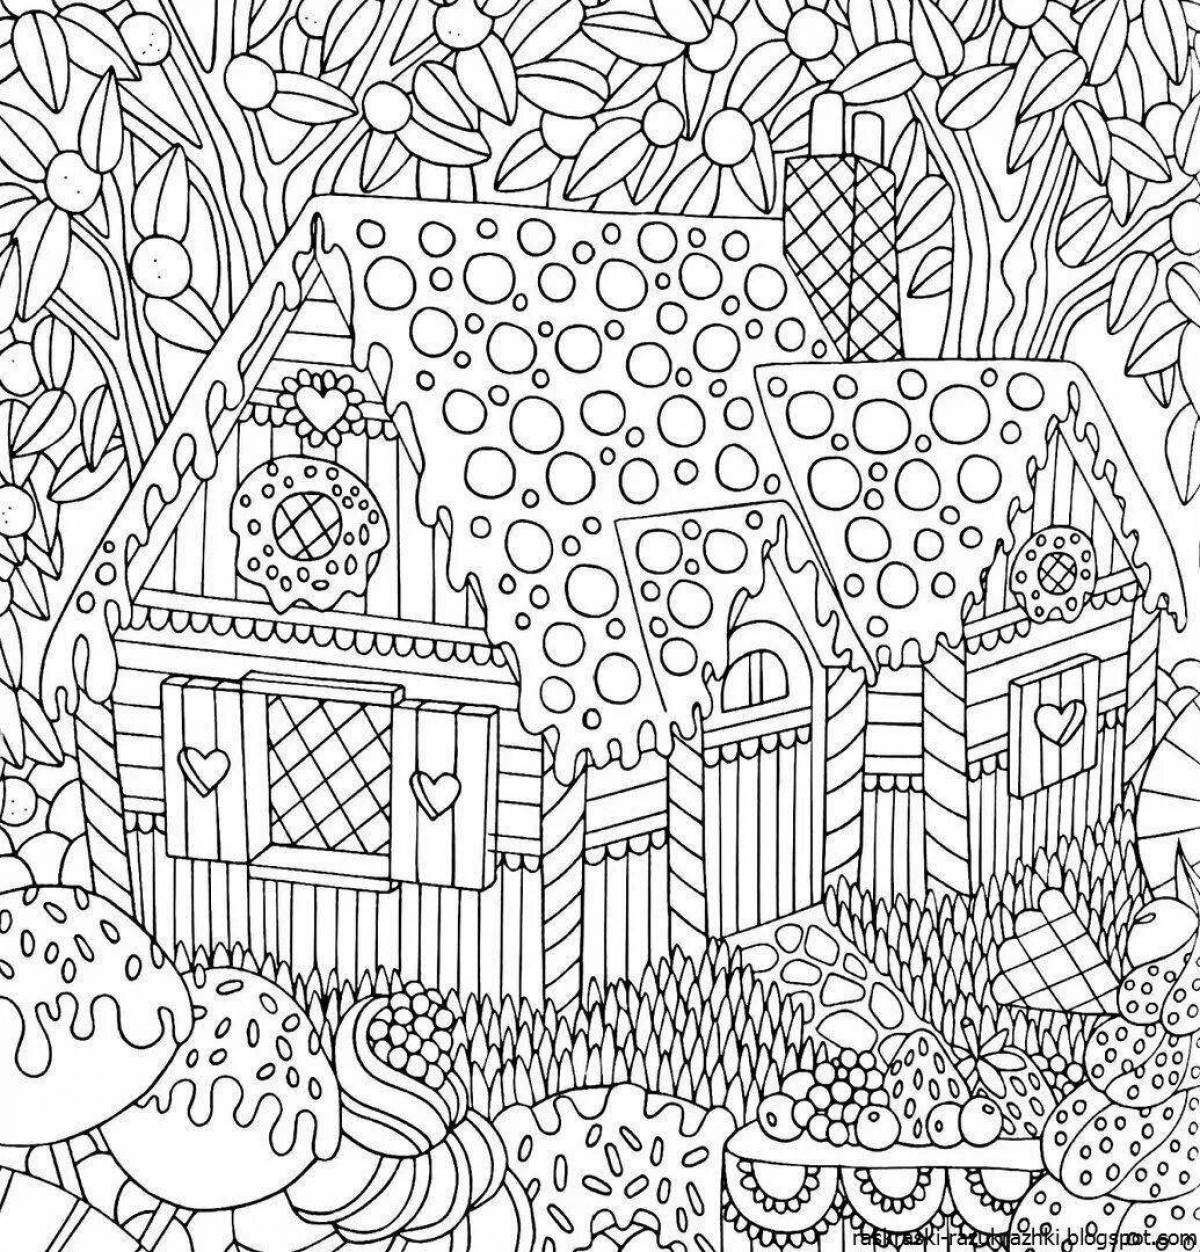 Fun anti-stress coloring book for 8 year olds